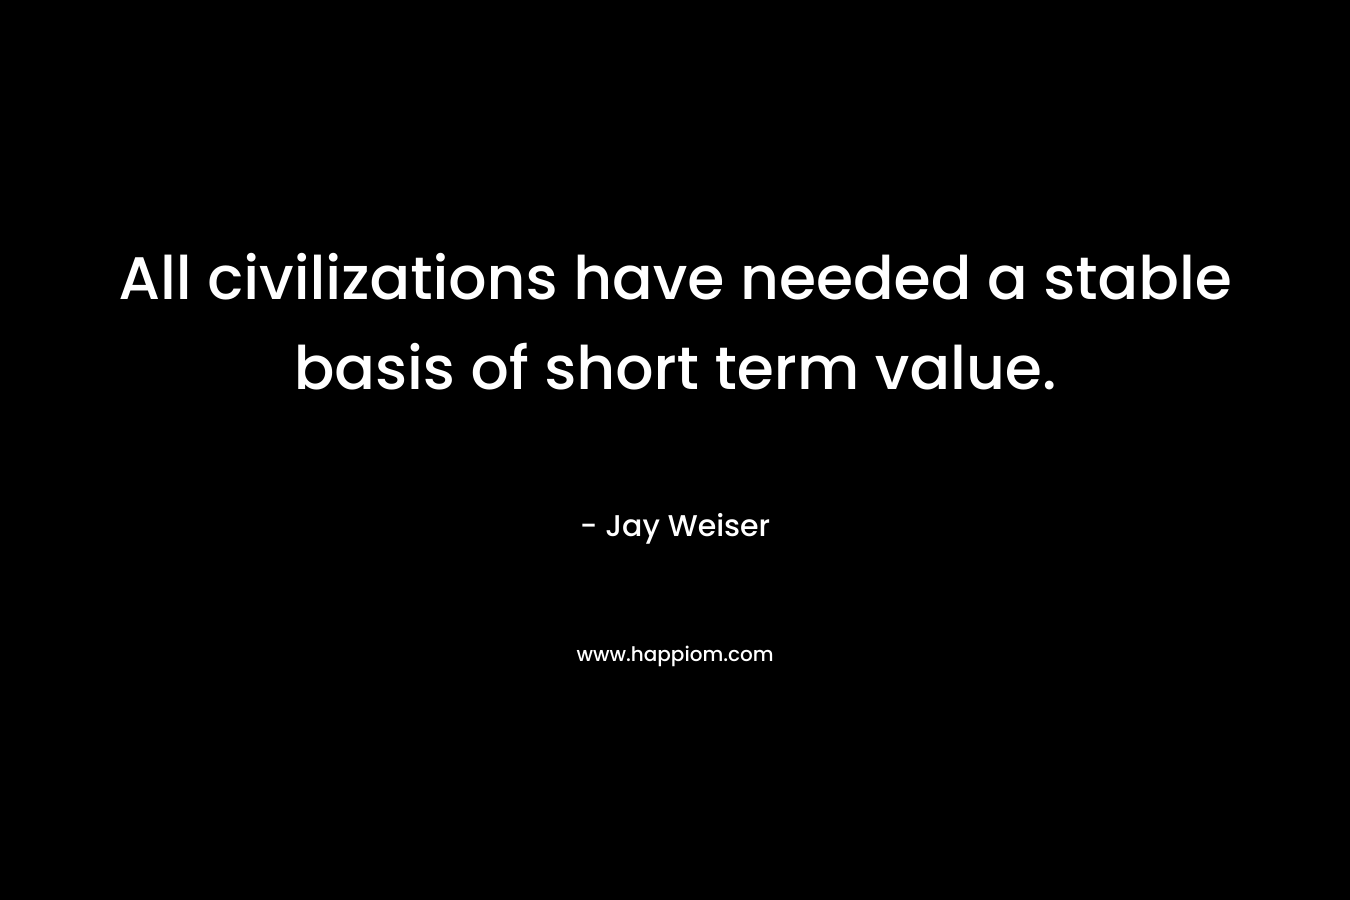 All civilizations have needed a stable basis of short term value. – Jay Weiser